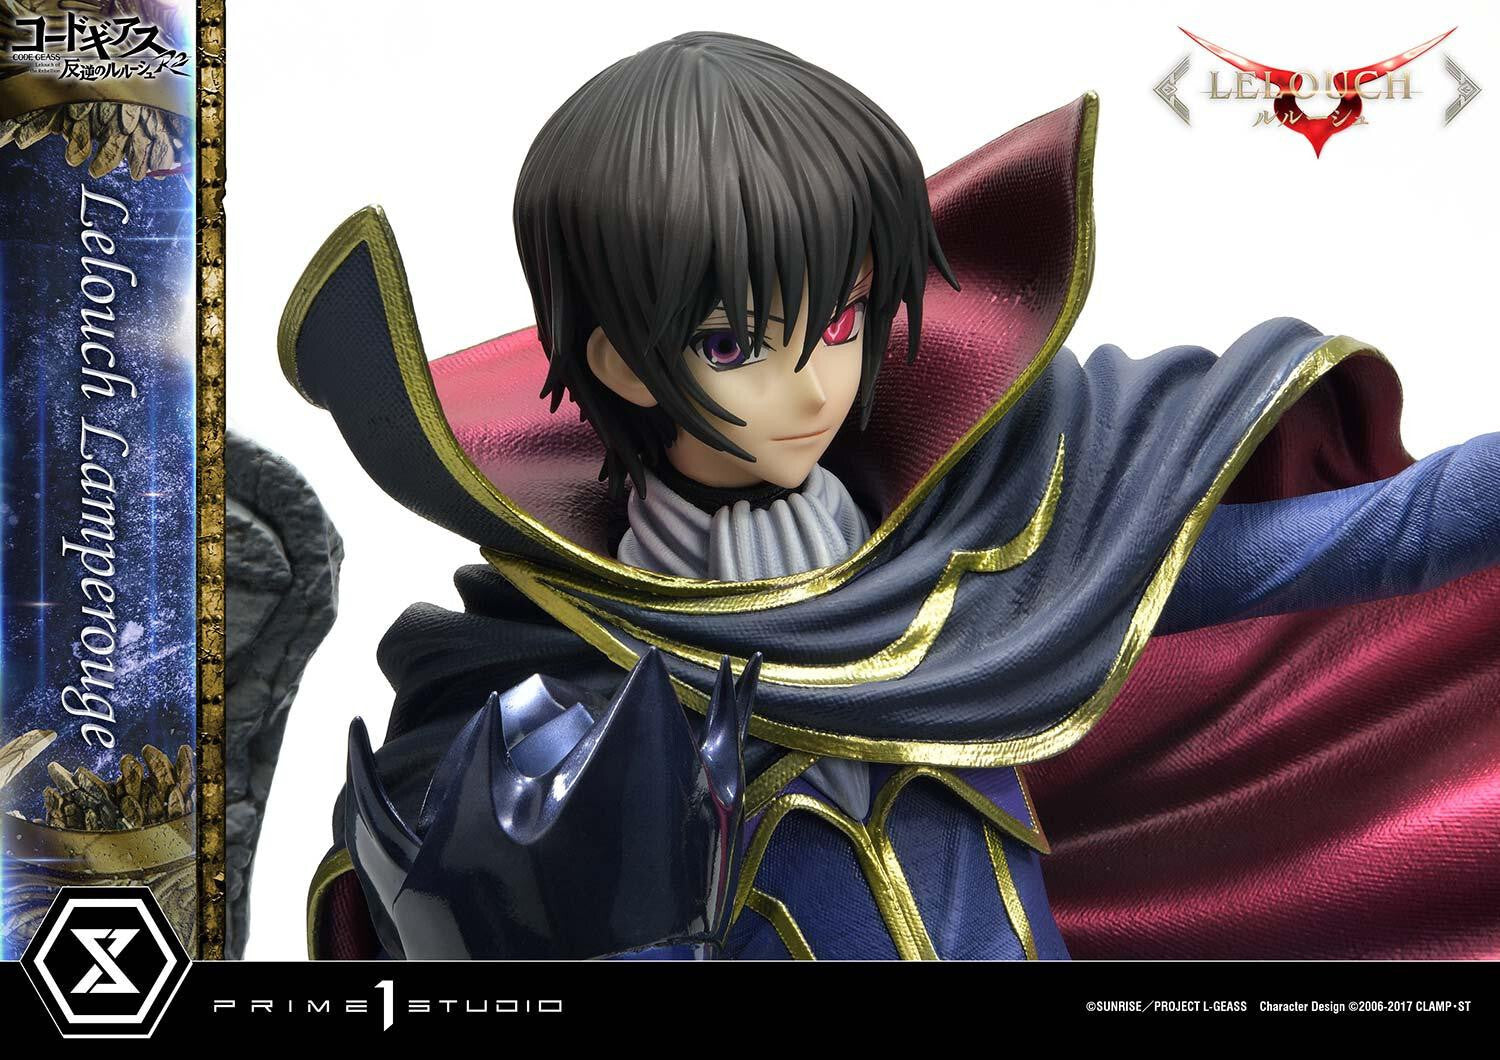 Code Geass: Lelouch Of The Rebellion Concept Masterline Series Statue 1/6  Lelouch Lamperouge 44 Cm Prime 1 Studio